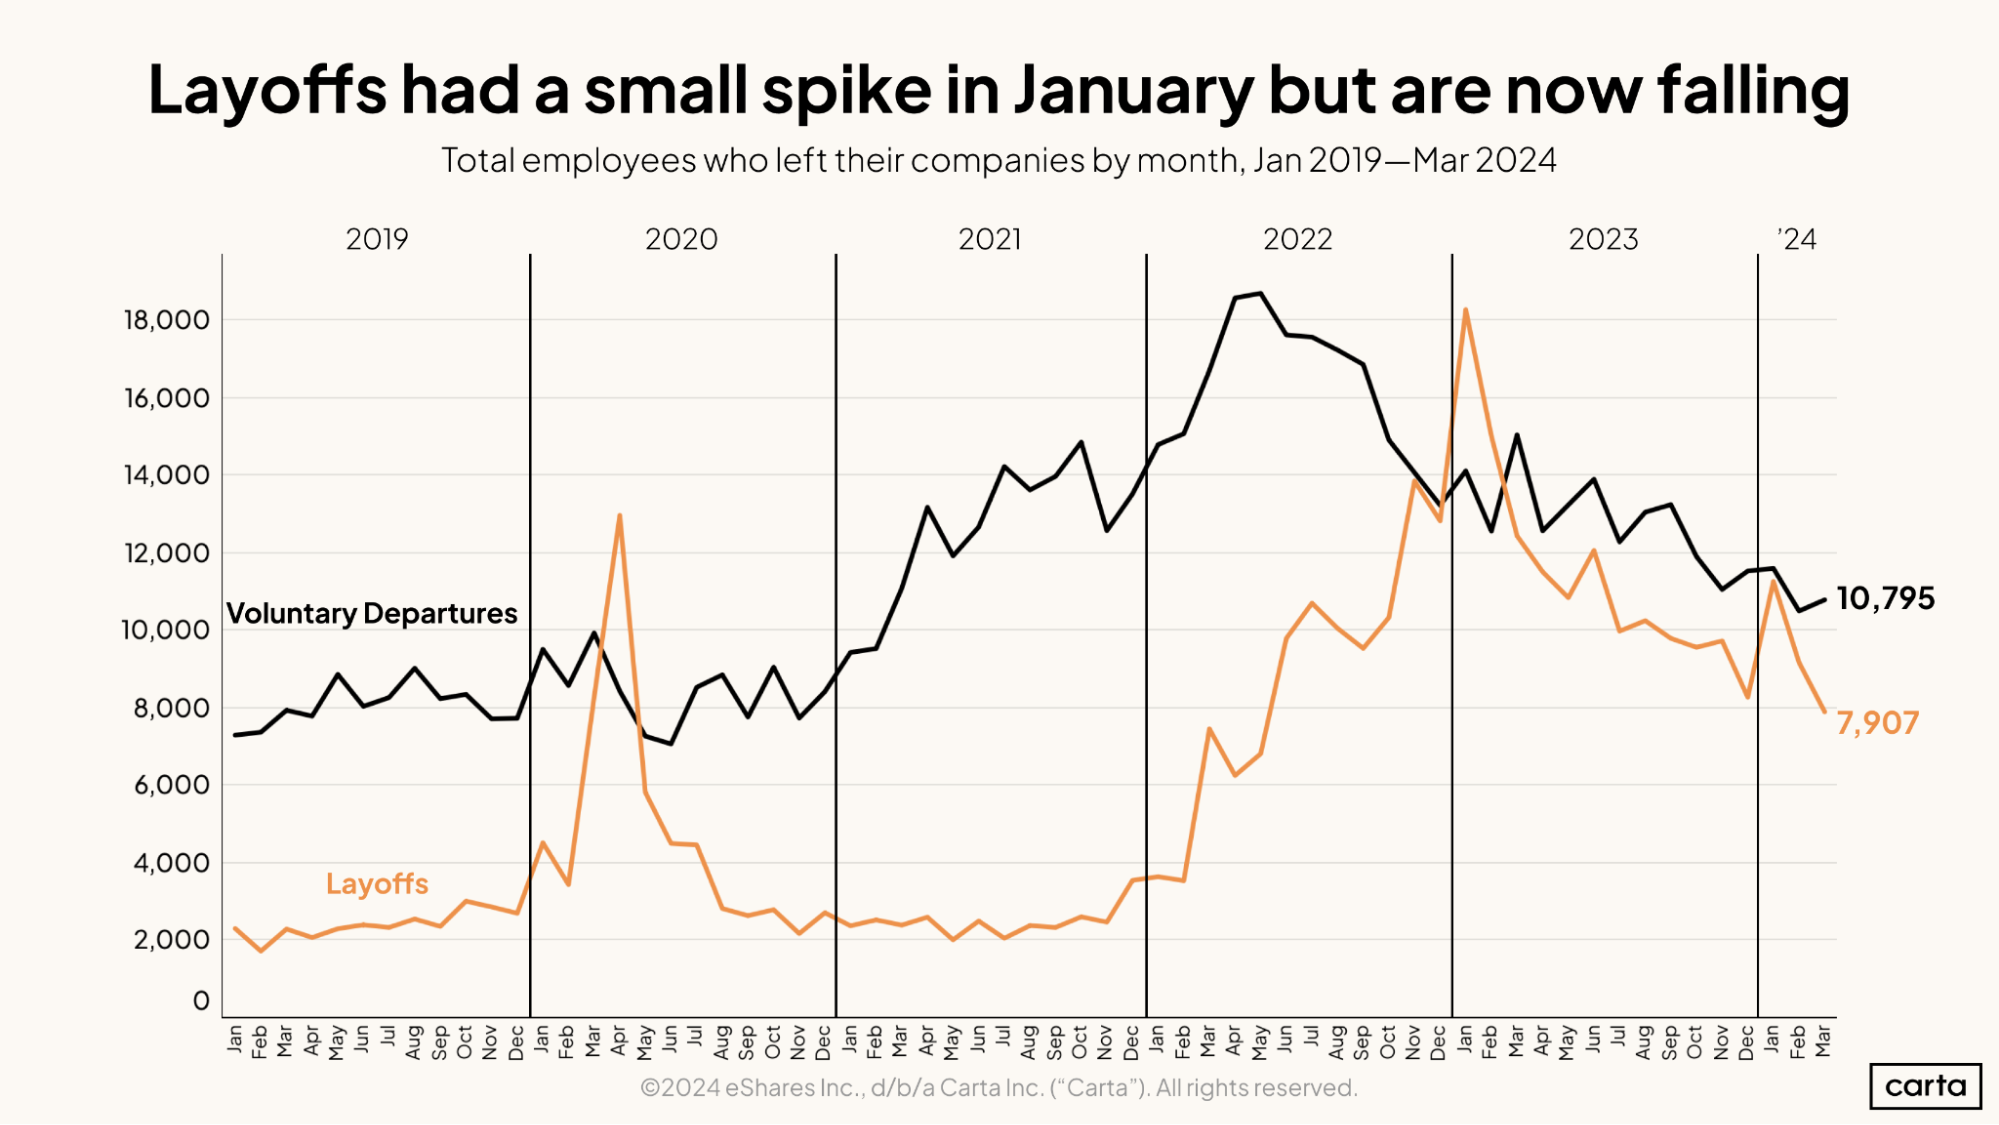 Layoffs had a small spike in January but are now falling